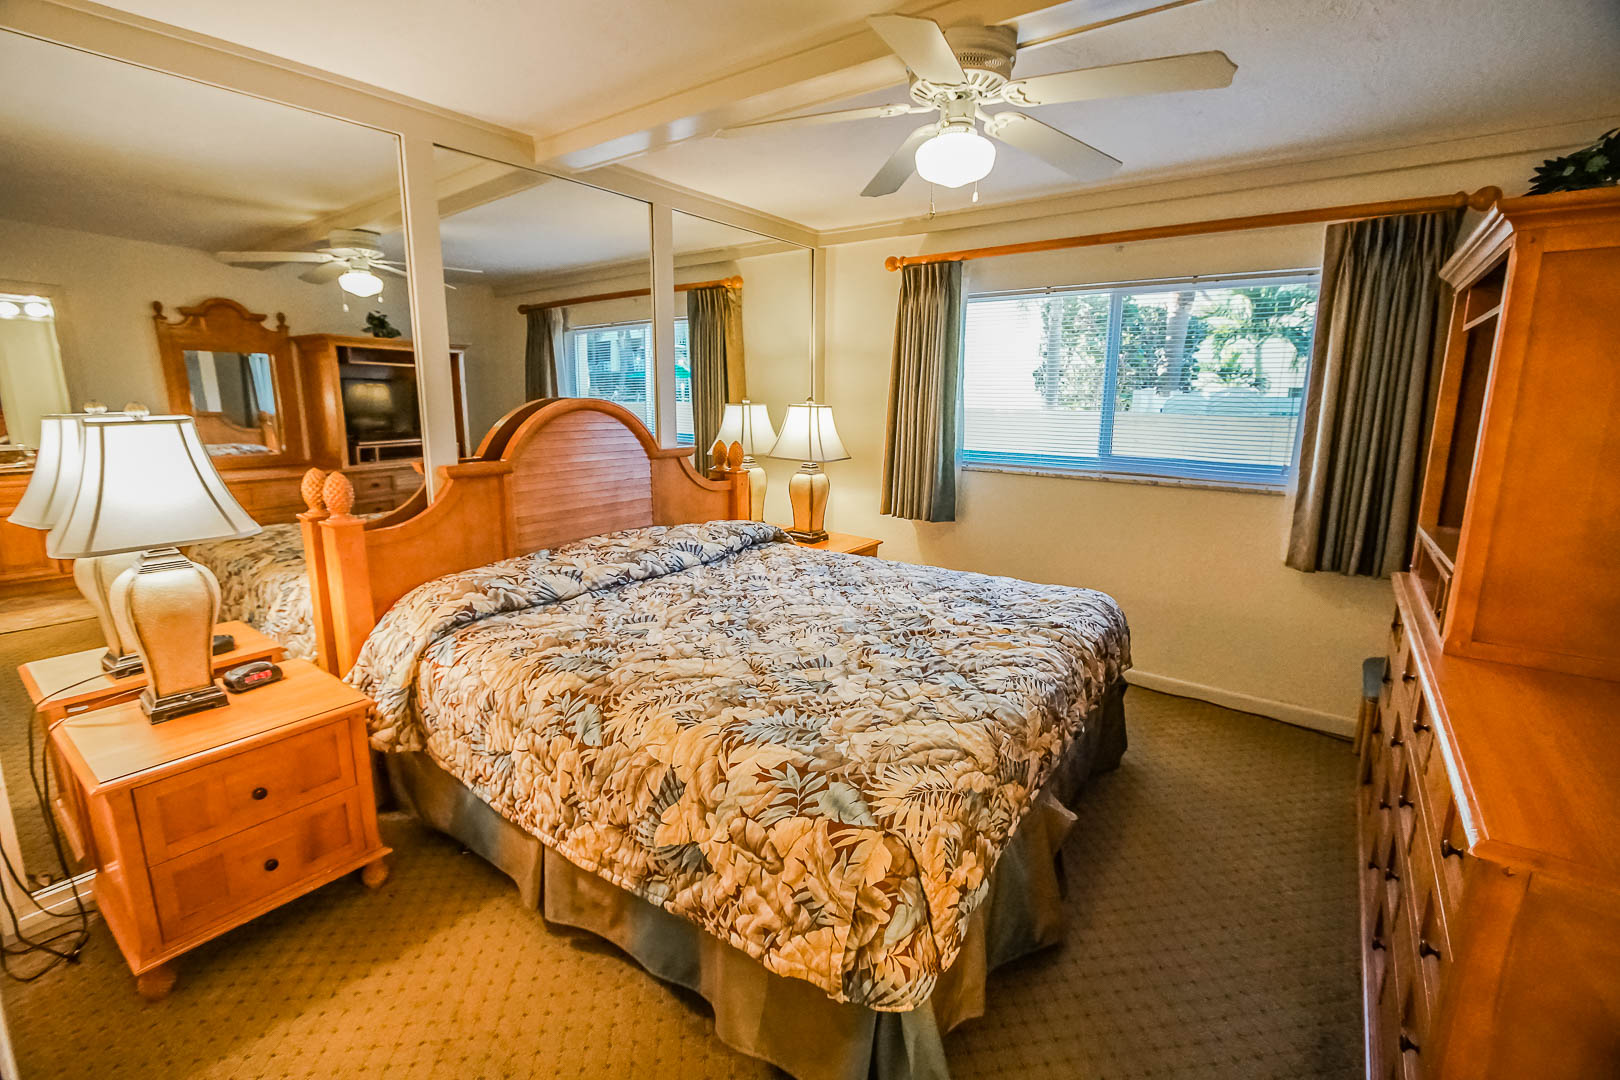 A spacious master bedroom at VRI's Coral Reef Beach Resort in St. Pete Beach, Florida.